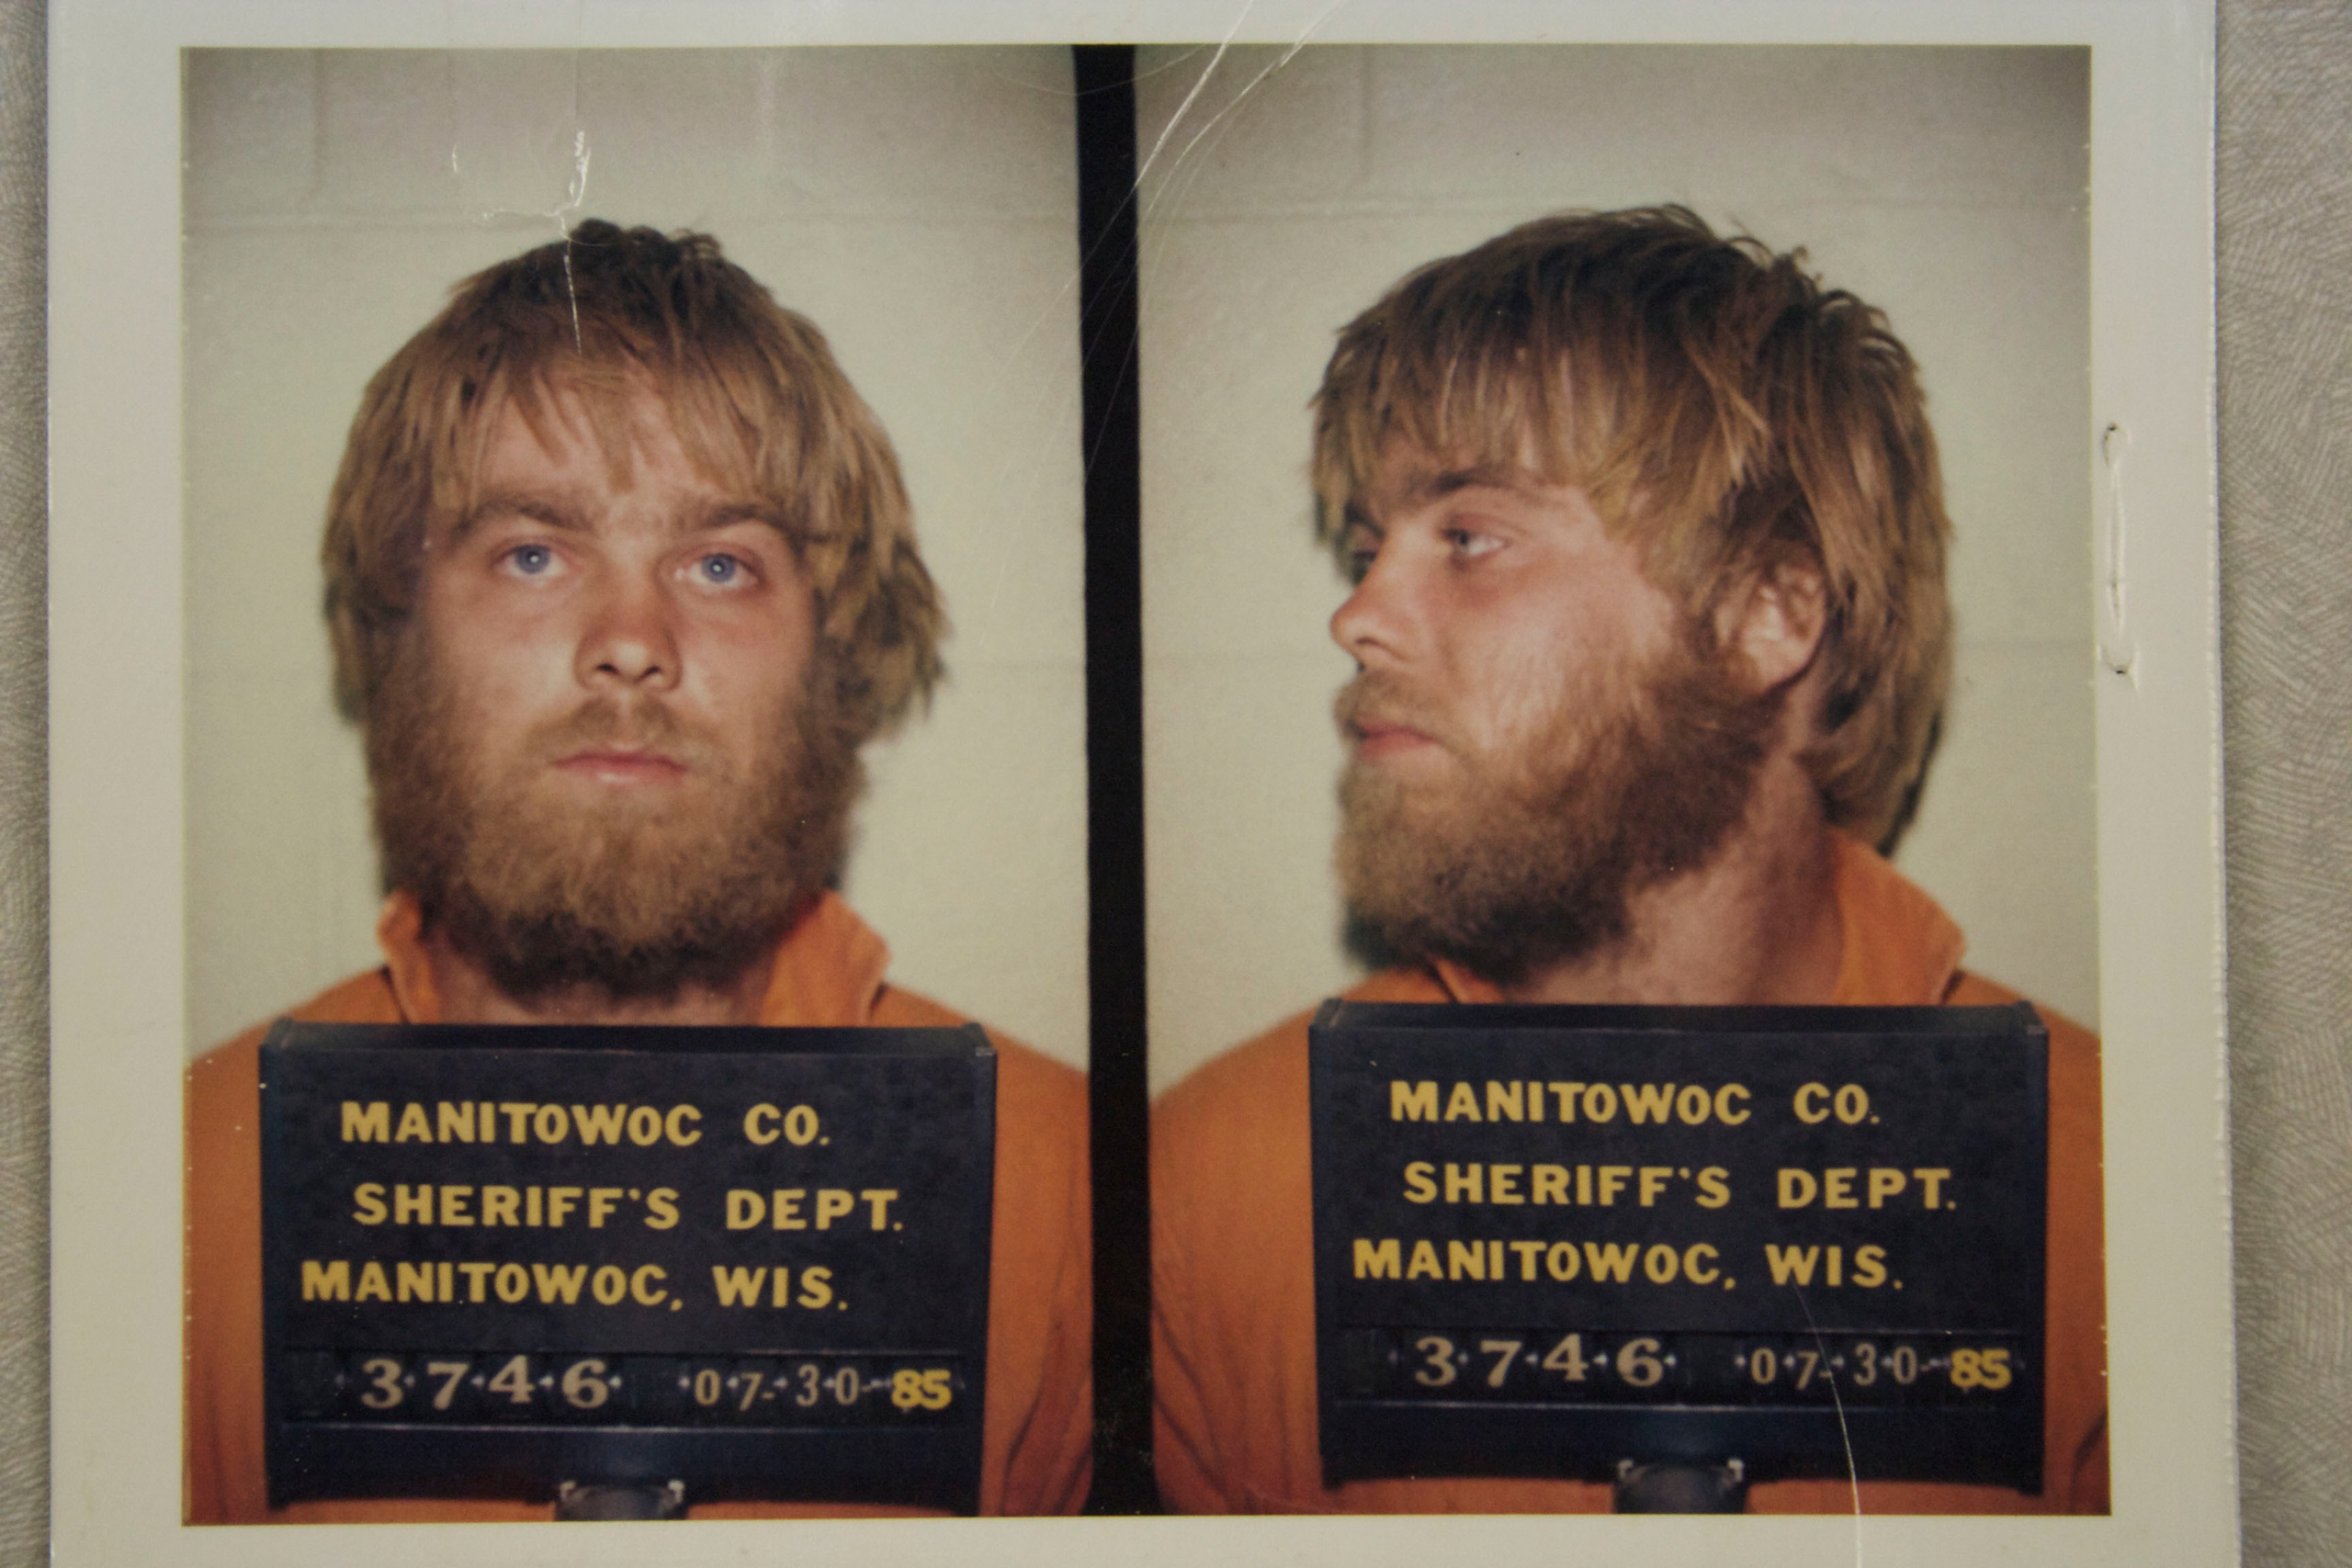 Steven Avery has already served time in prison for a crime he did not commit; a new Netflix series suggests the same thing is happening again (Netflix)